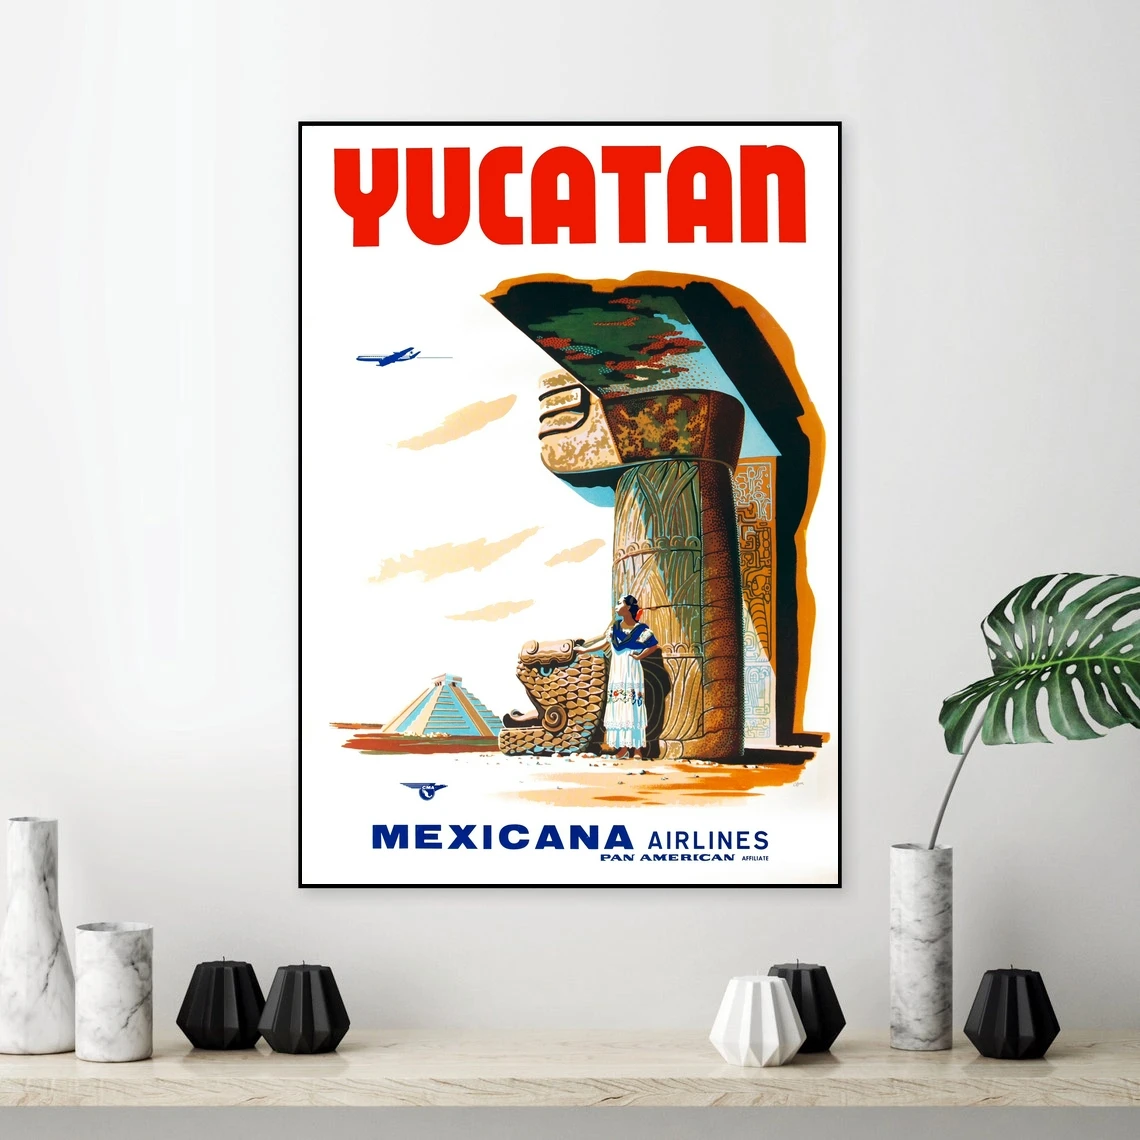 Vintage Pan Am Fly to Yucatan Airline Poster A3/A4 Print 